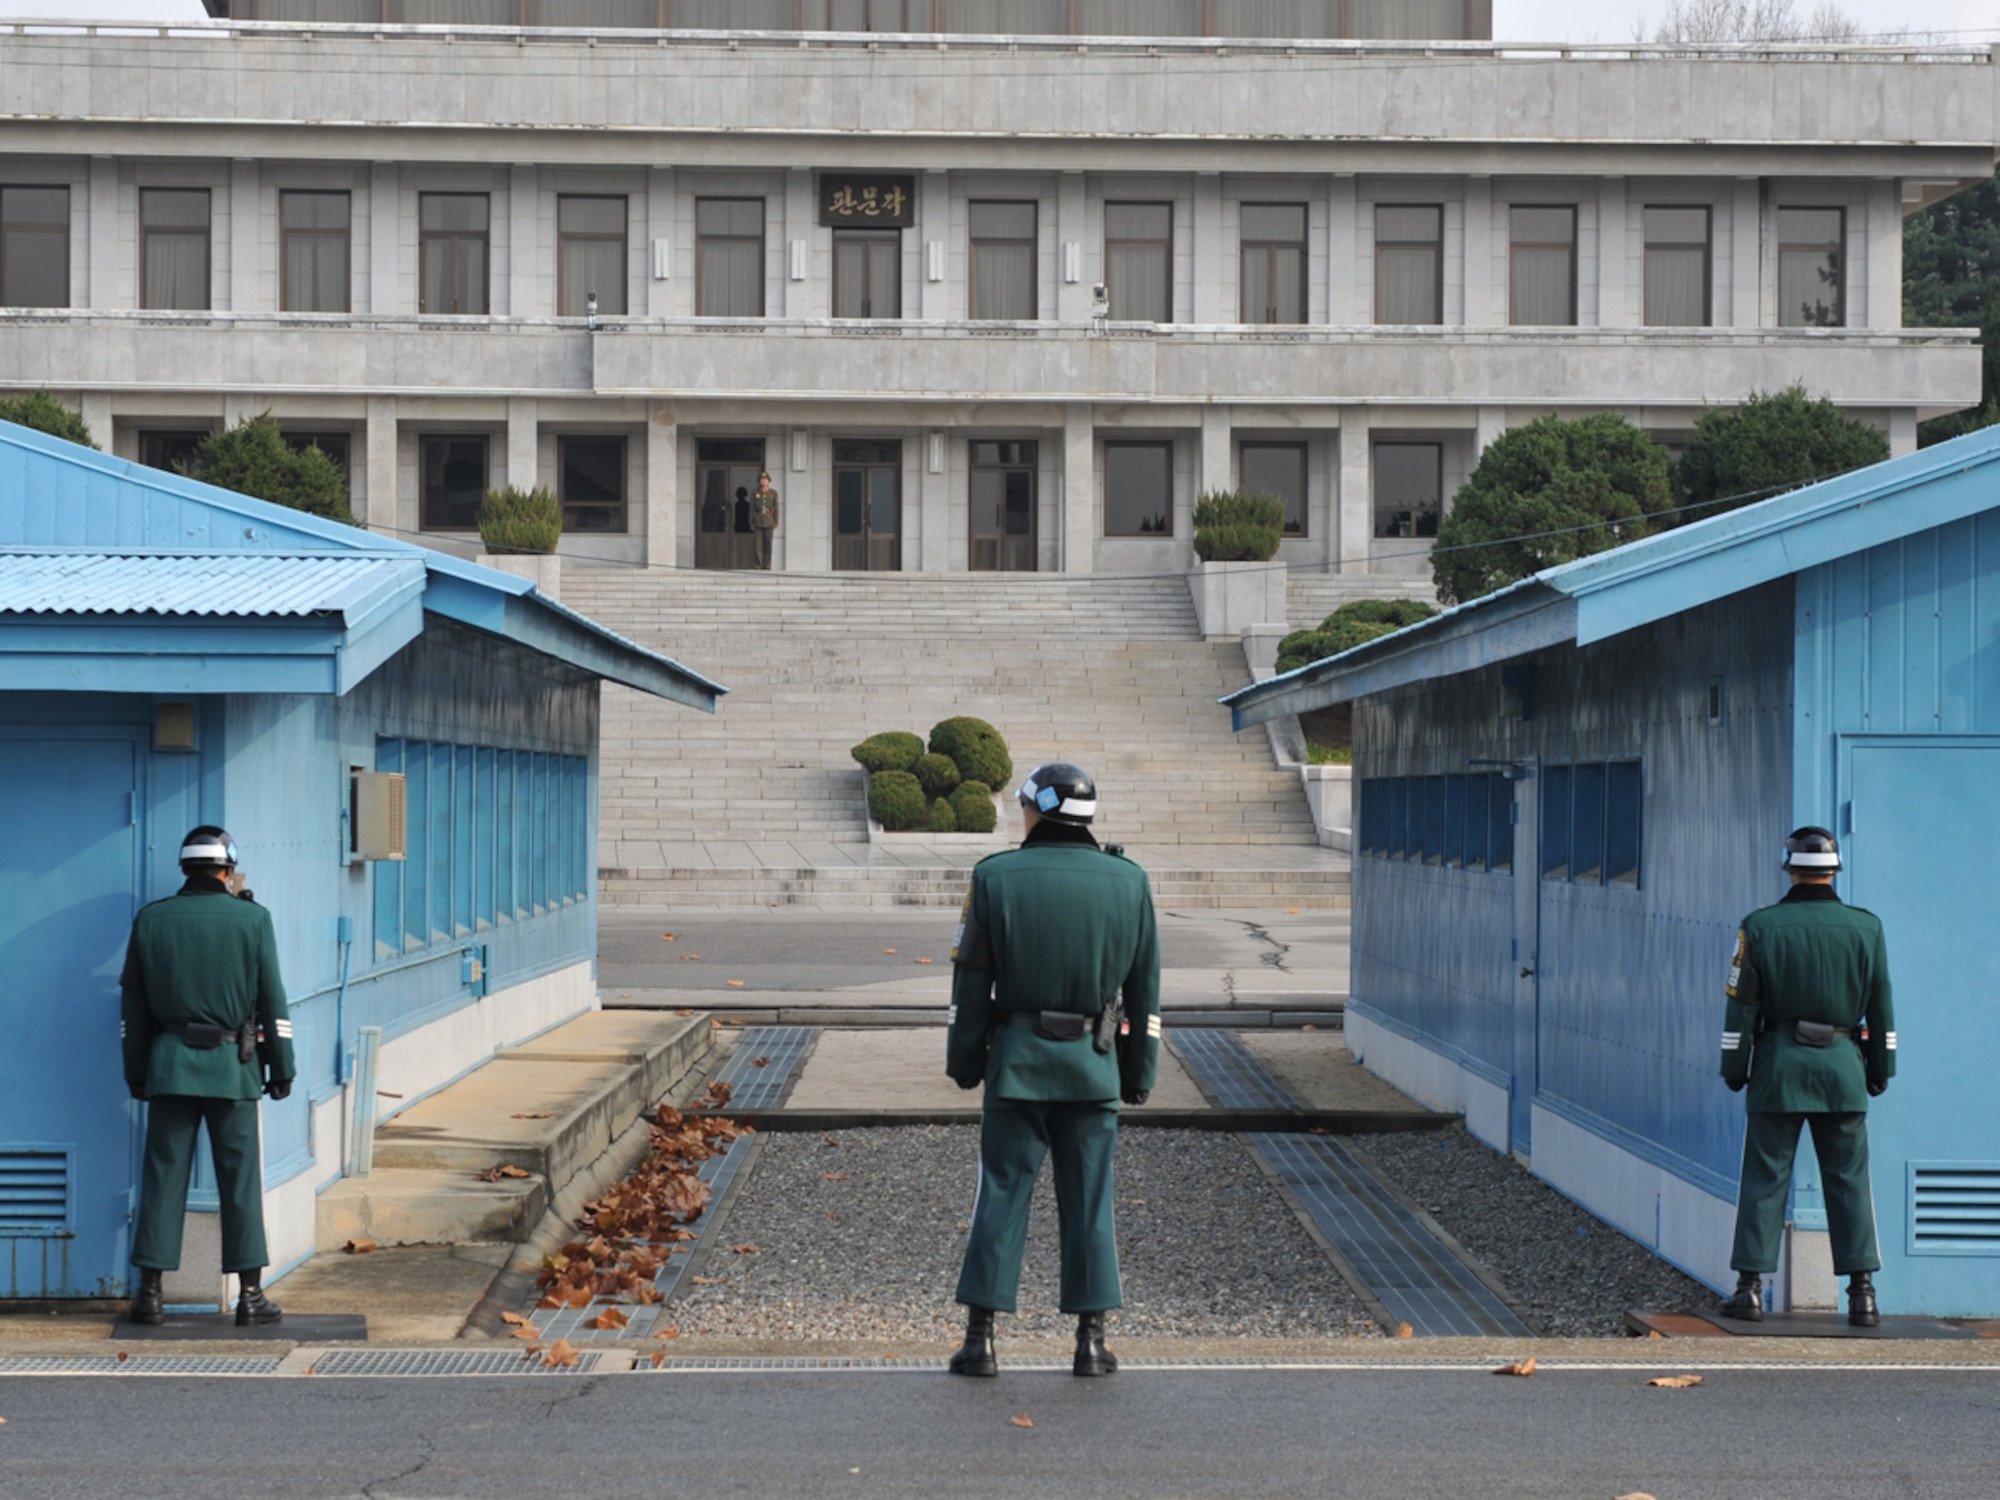 The Korean Demilitarized Zone and Joint Security Area were created by the armistice that was signed in 1953. (U.S. Army photo/Sgt. Park Youngho)